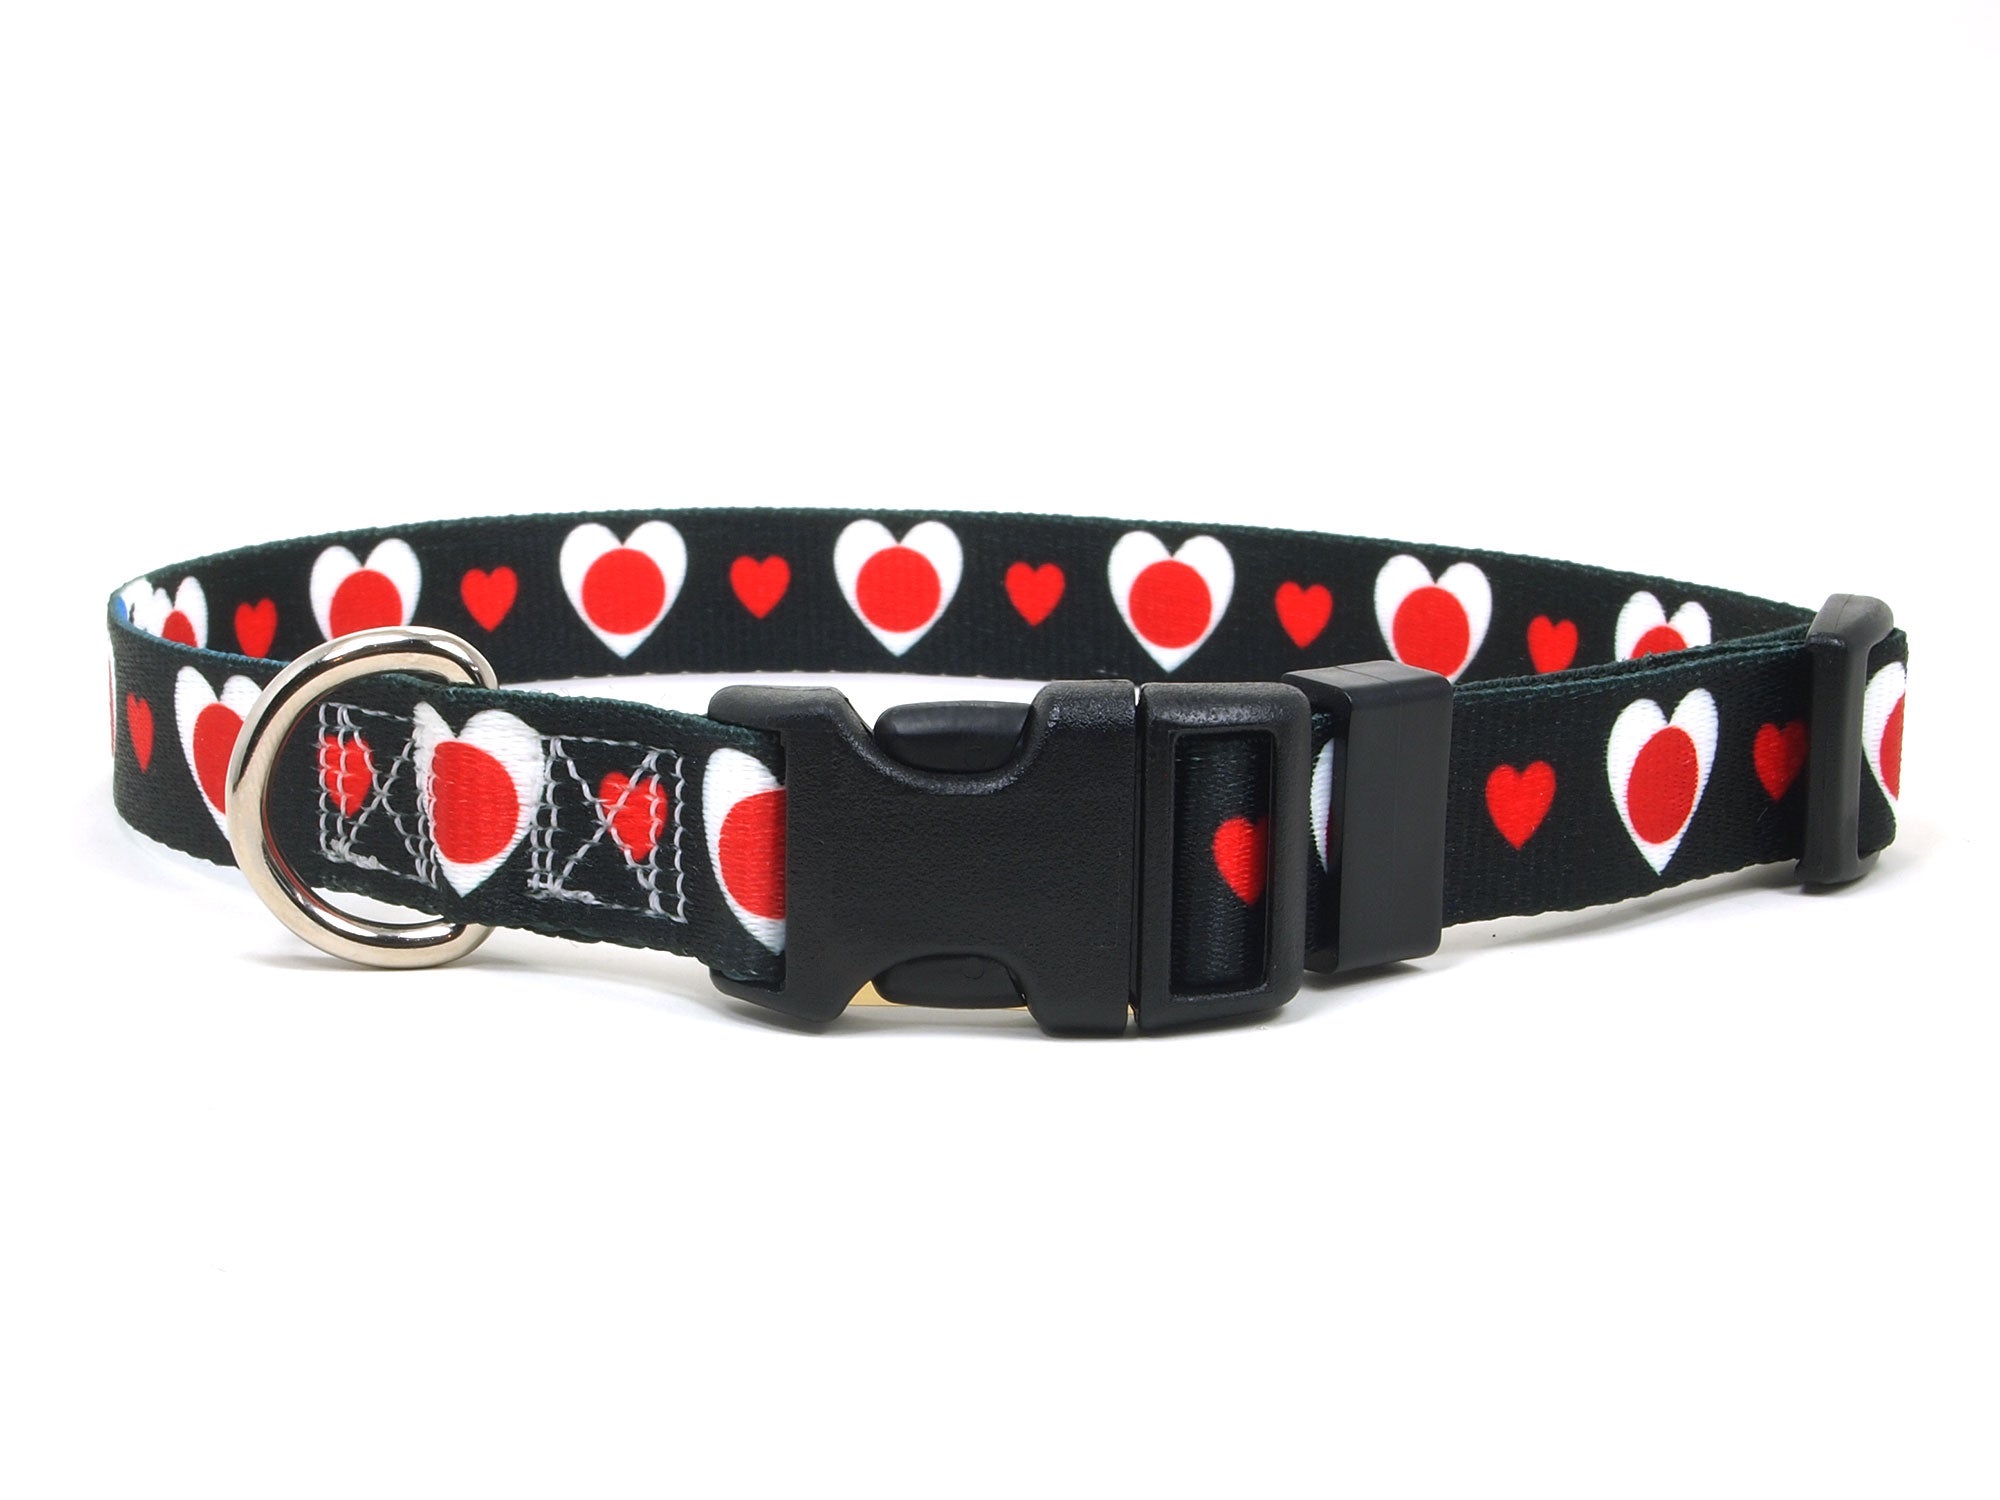 Dog Collar with Japan Hearts Pattern in black